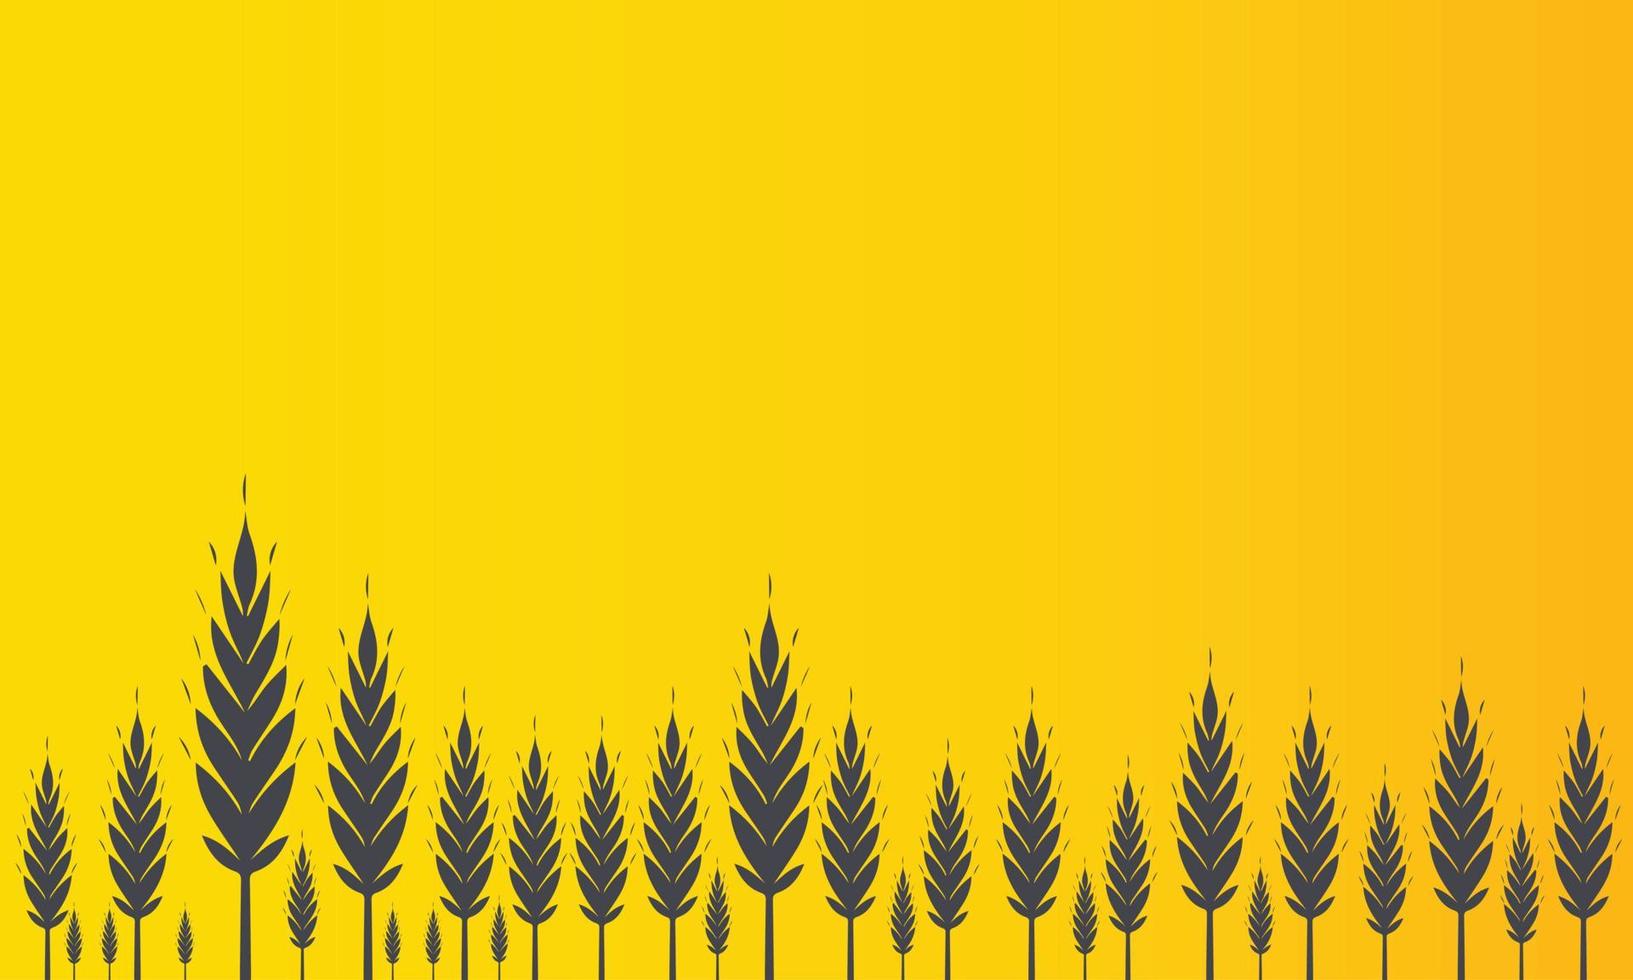 grain and rice field background or paddy isolated in gradient yellow background 2 with copy space area vector